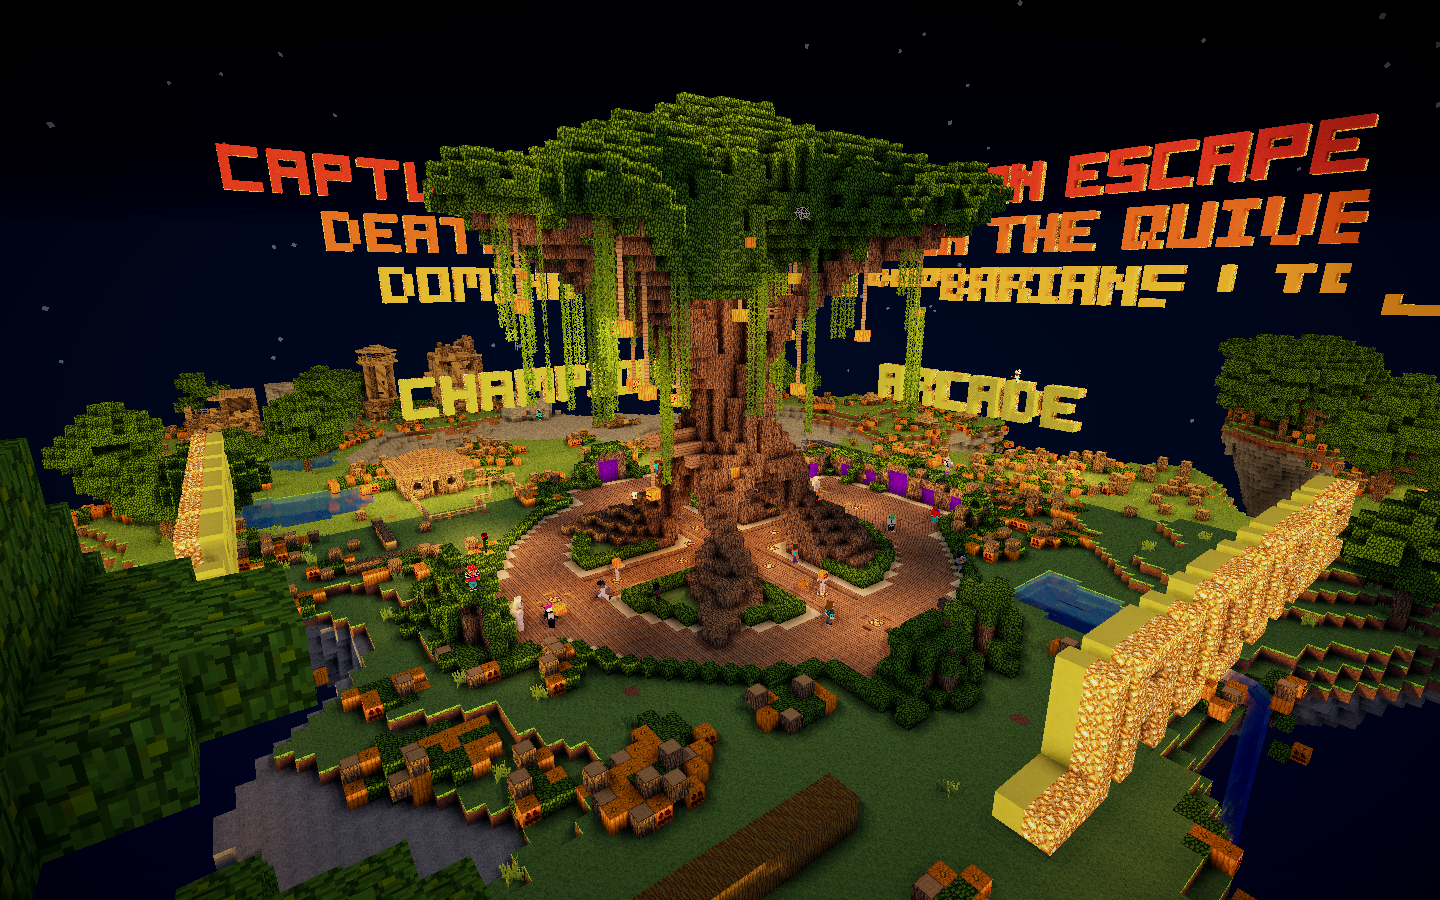 How Awesome Does Mineplex Look